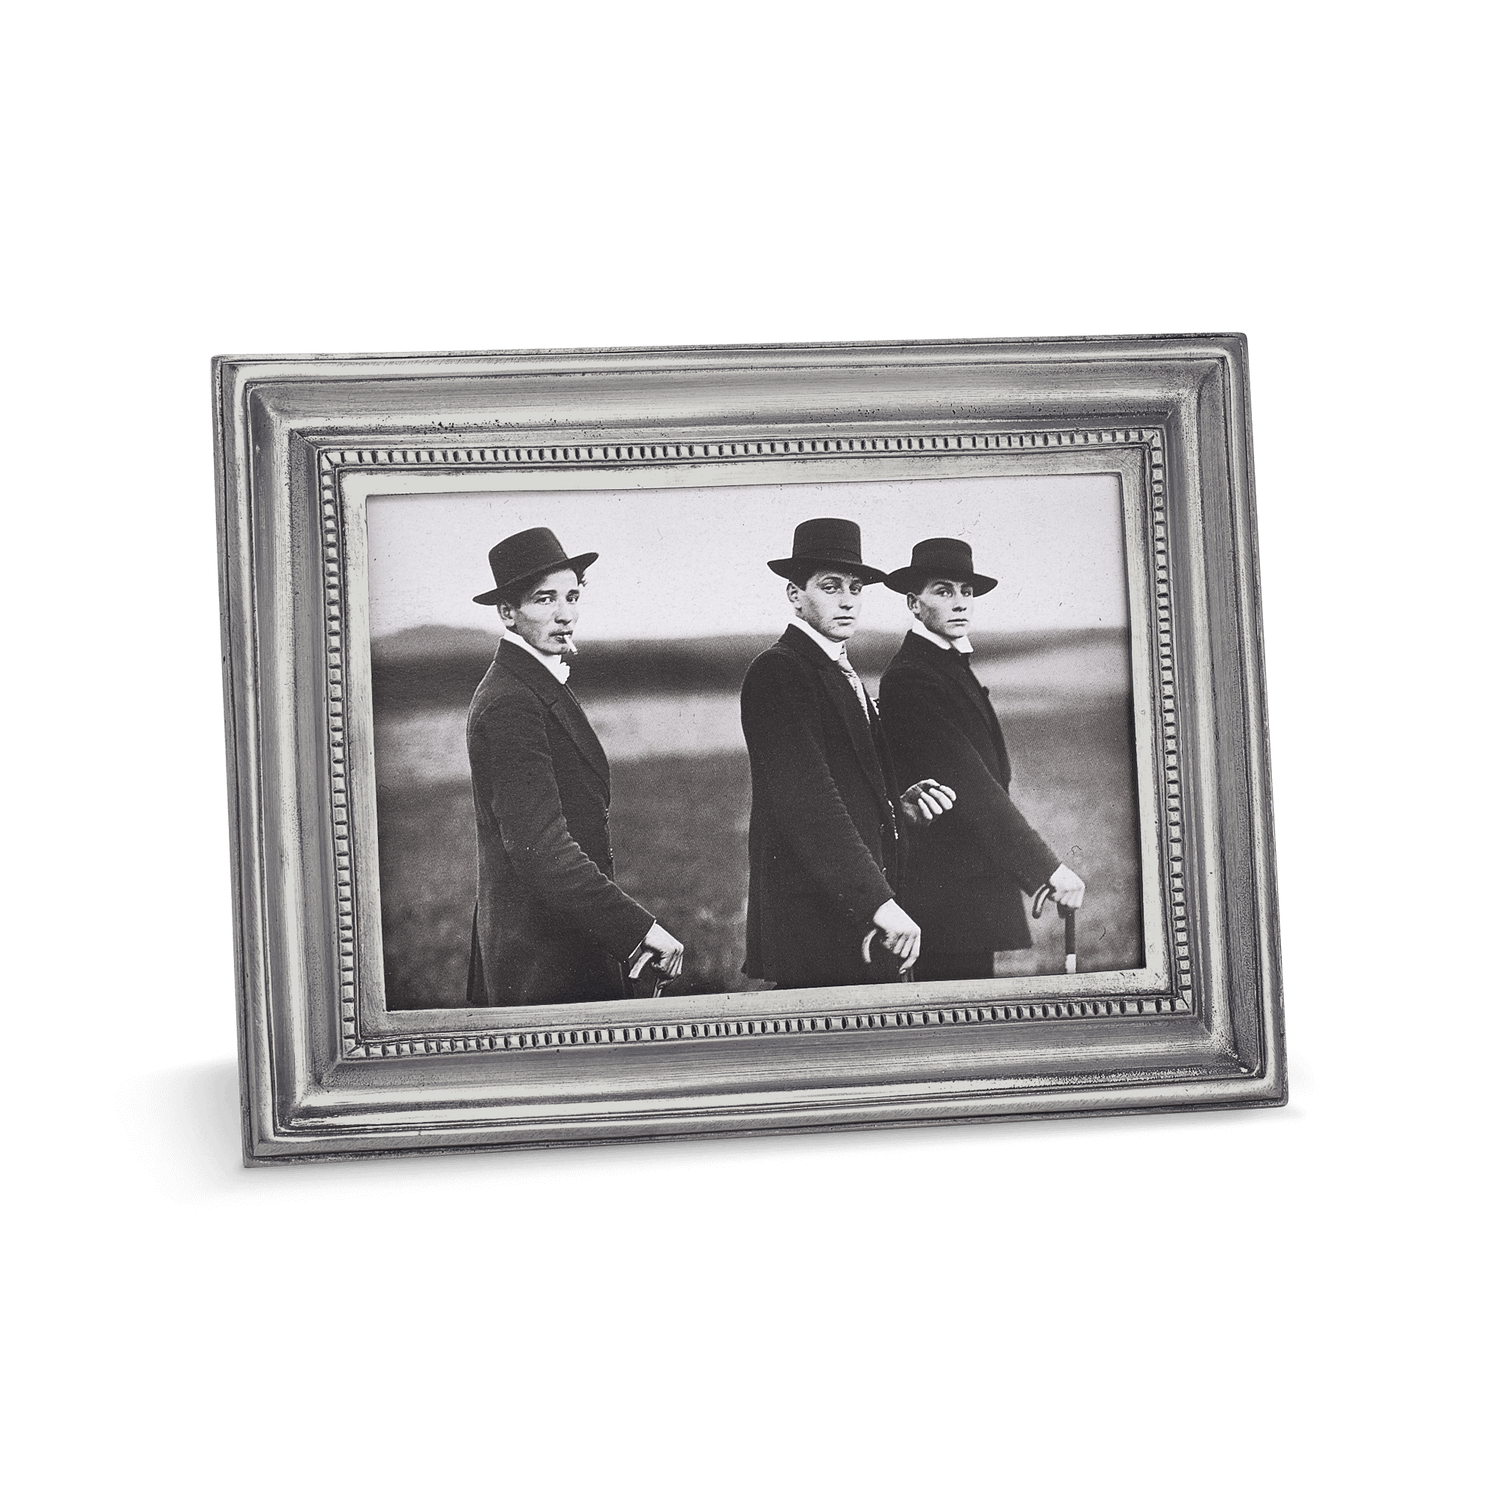 Tuscan Pewter Picture Frame 4 x 6 – Arte Italica